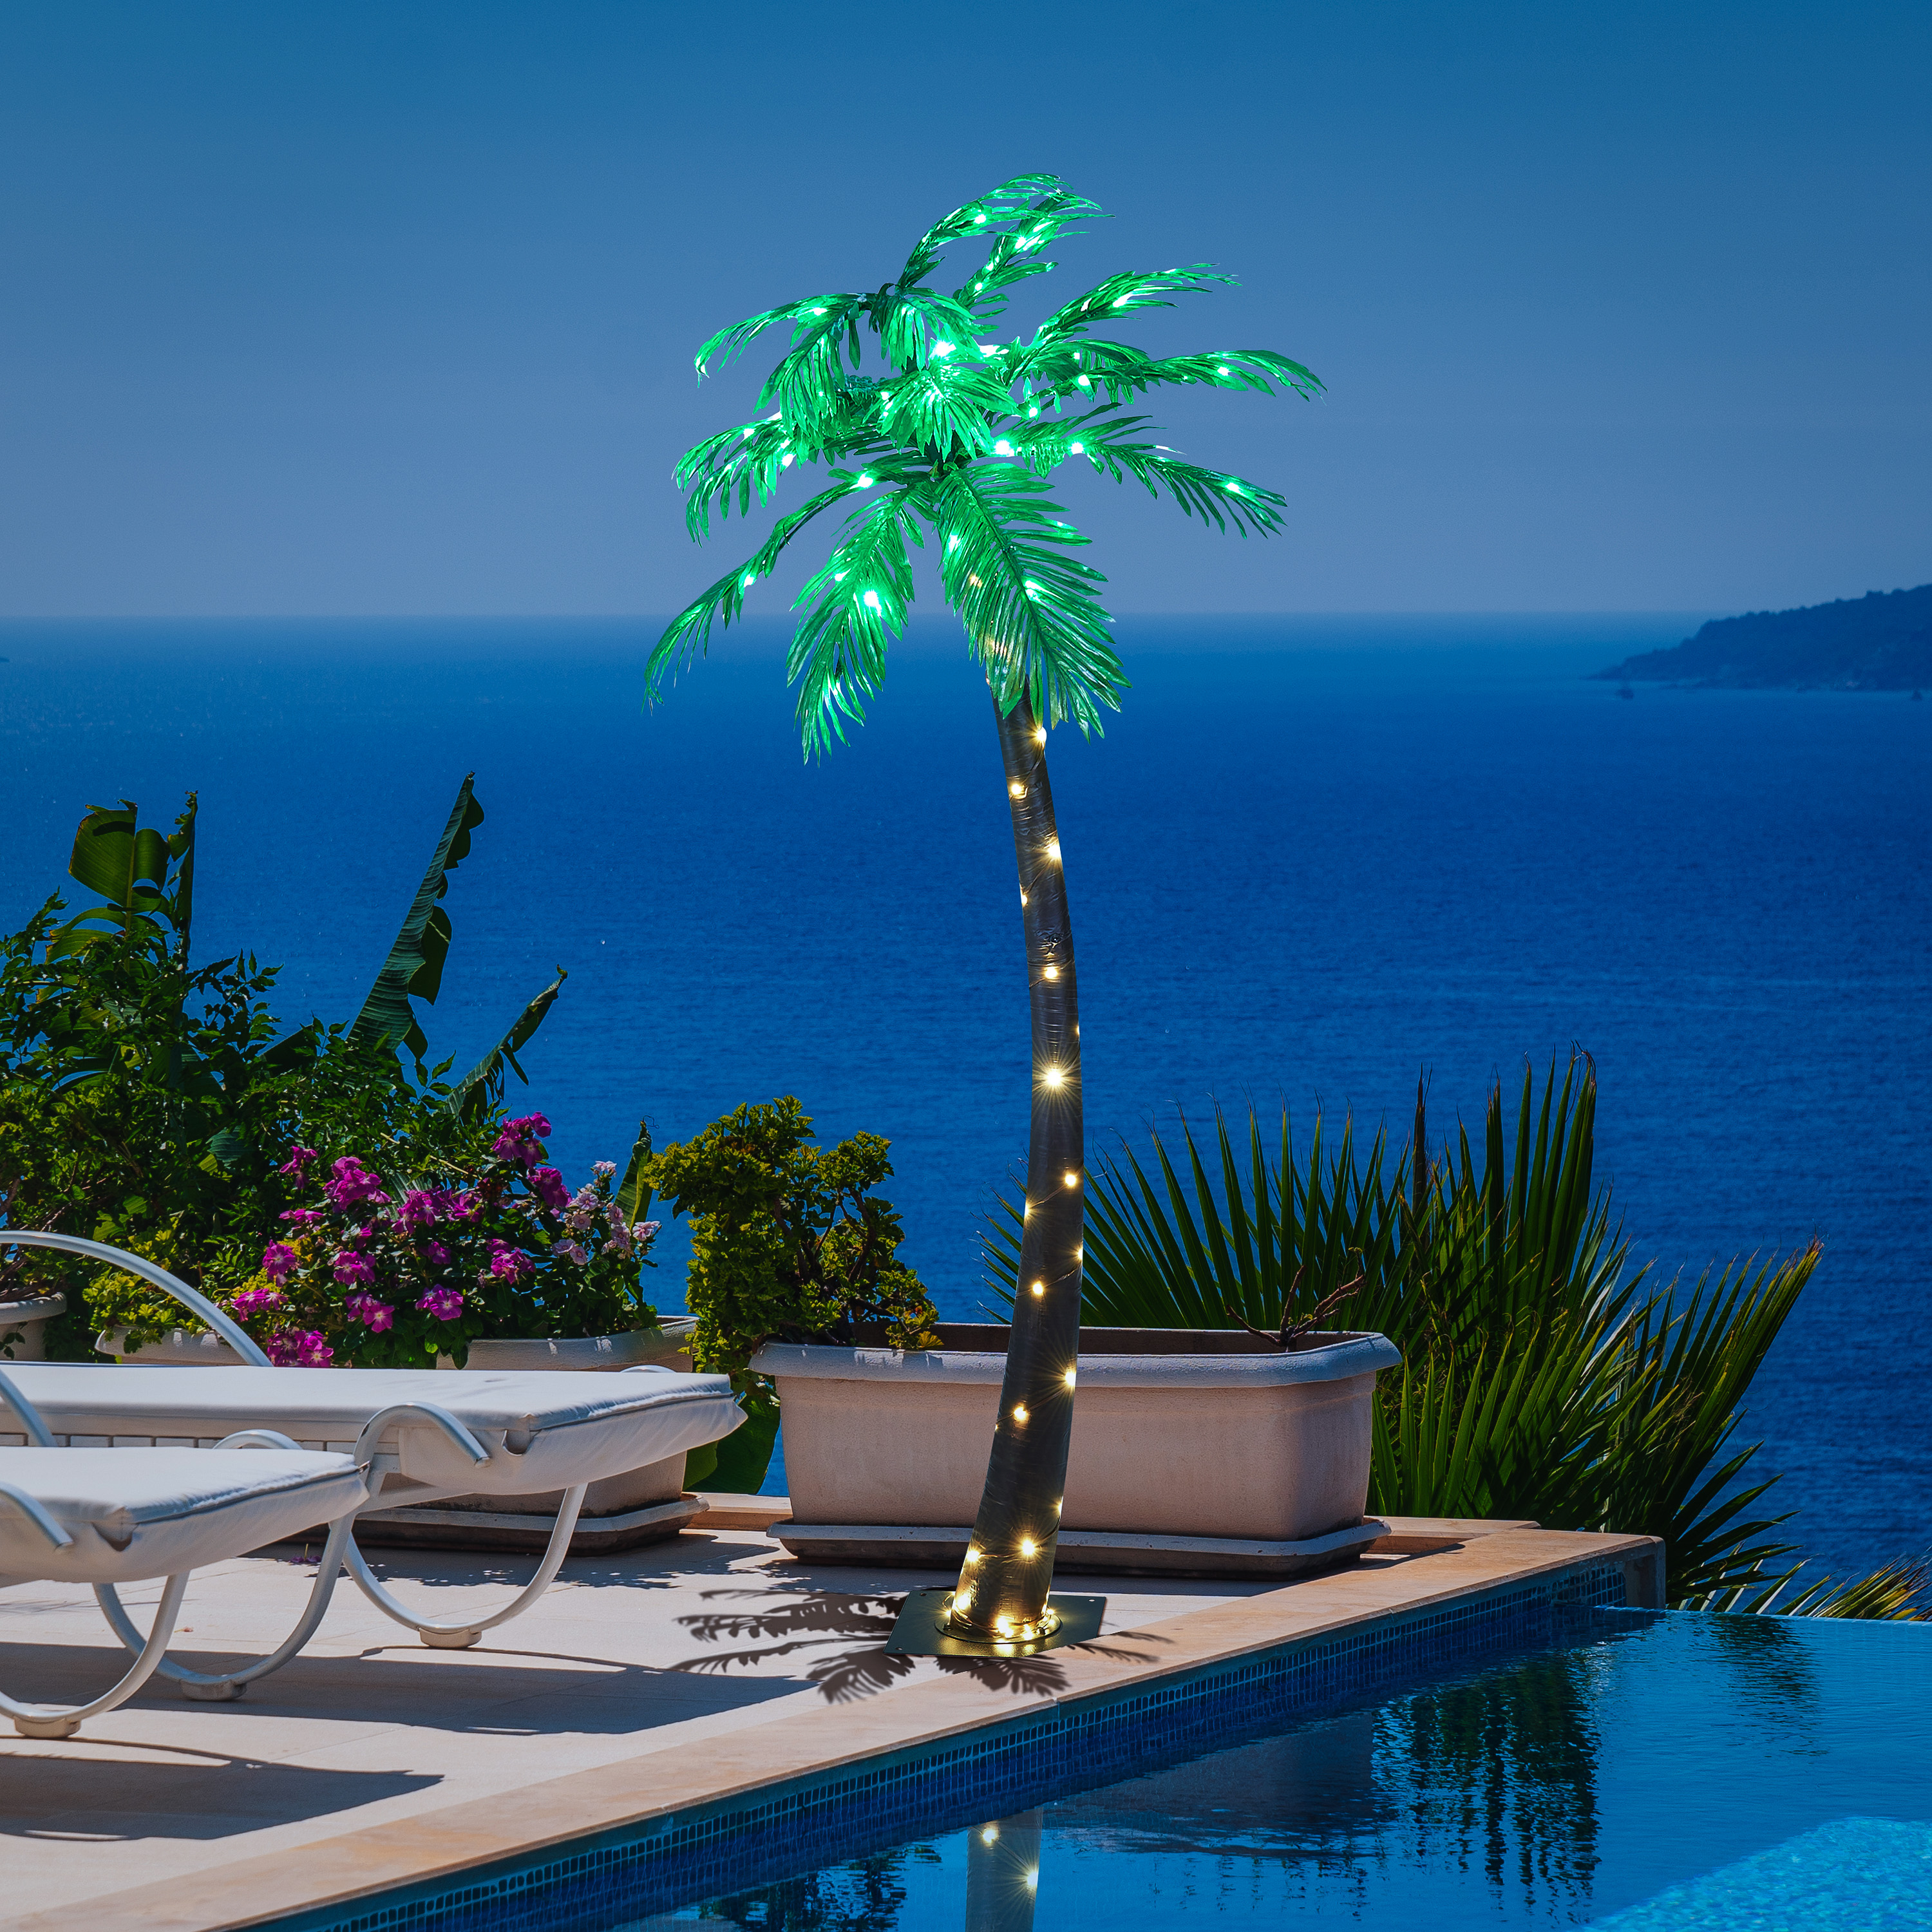 5ft Lighted Palm Tree, 96 LED Lights, Decoration for Home, Party, Christmas, Nativity, Outdoor Patio